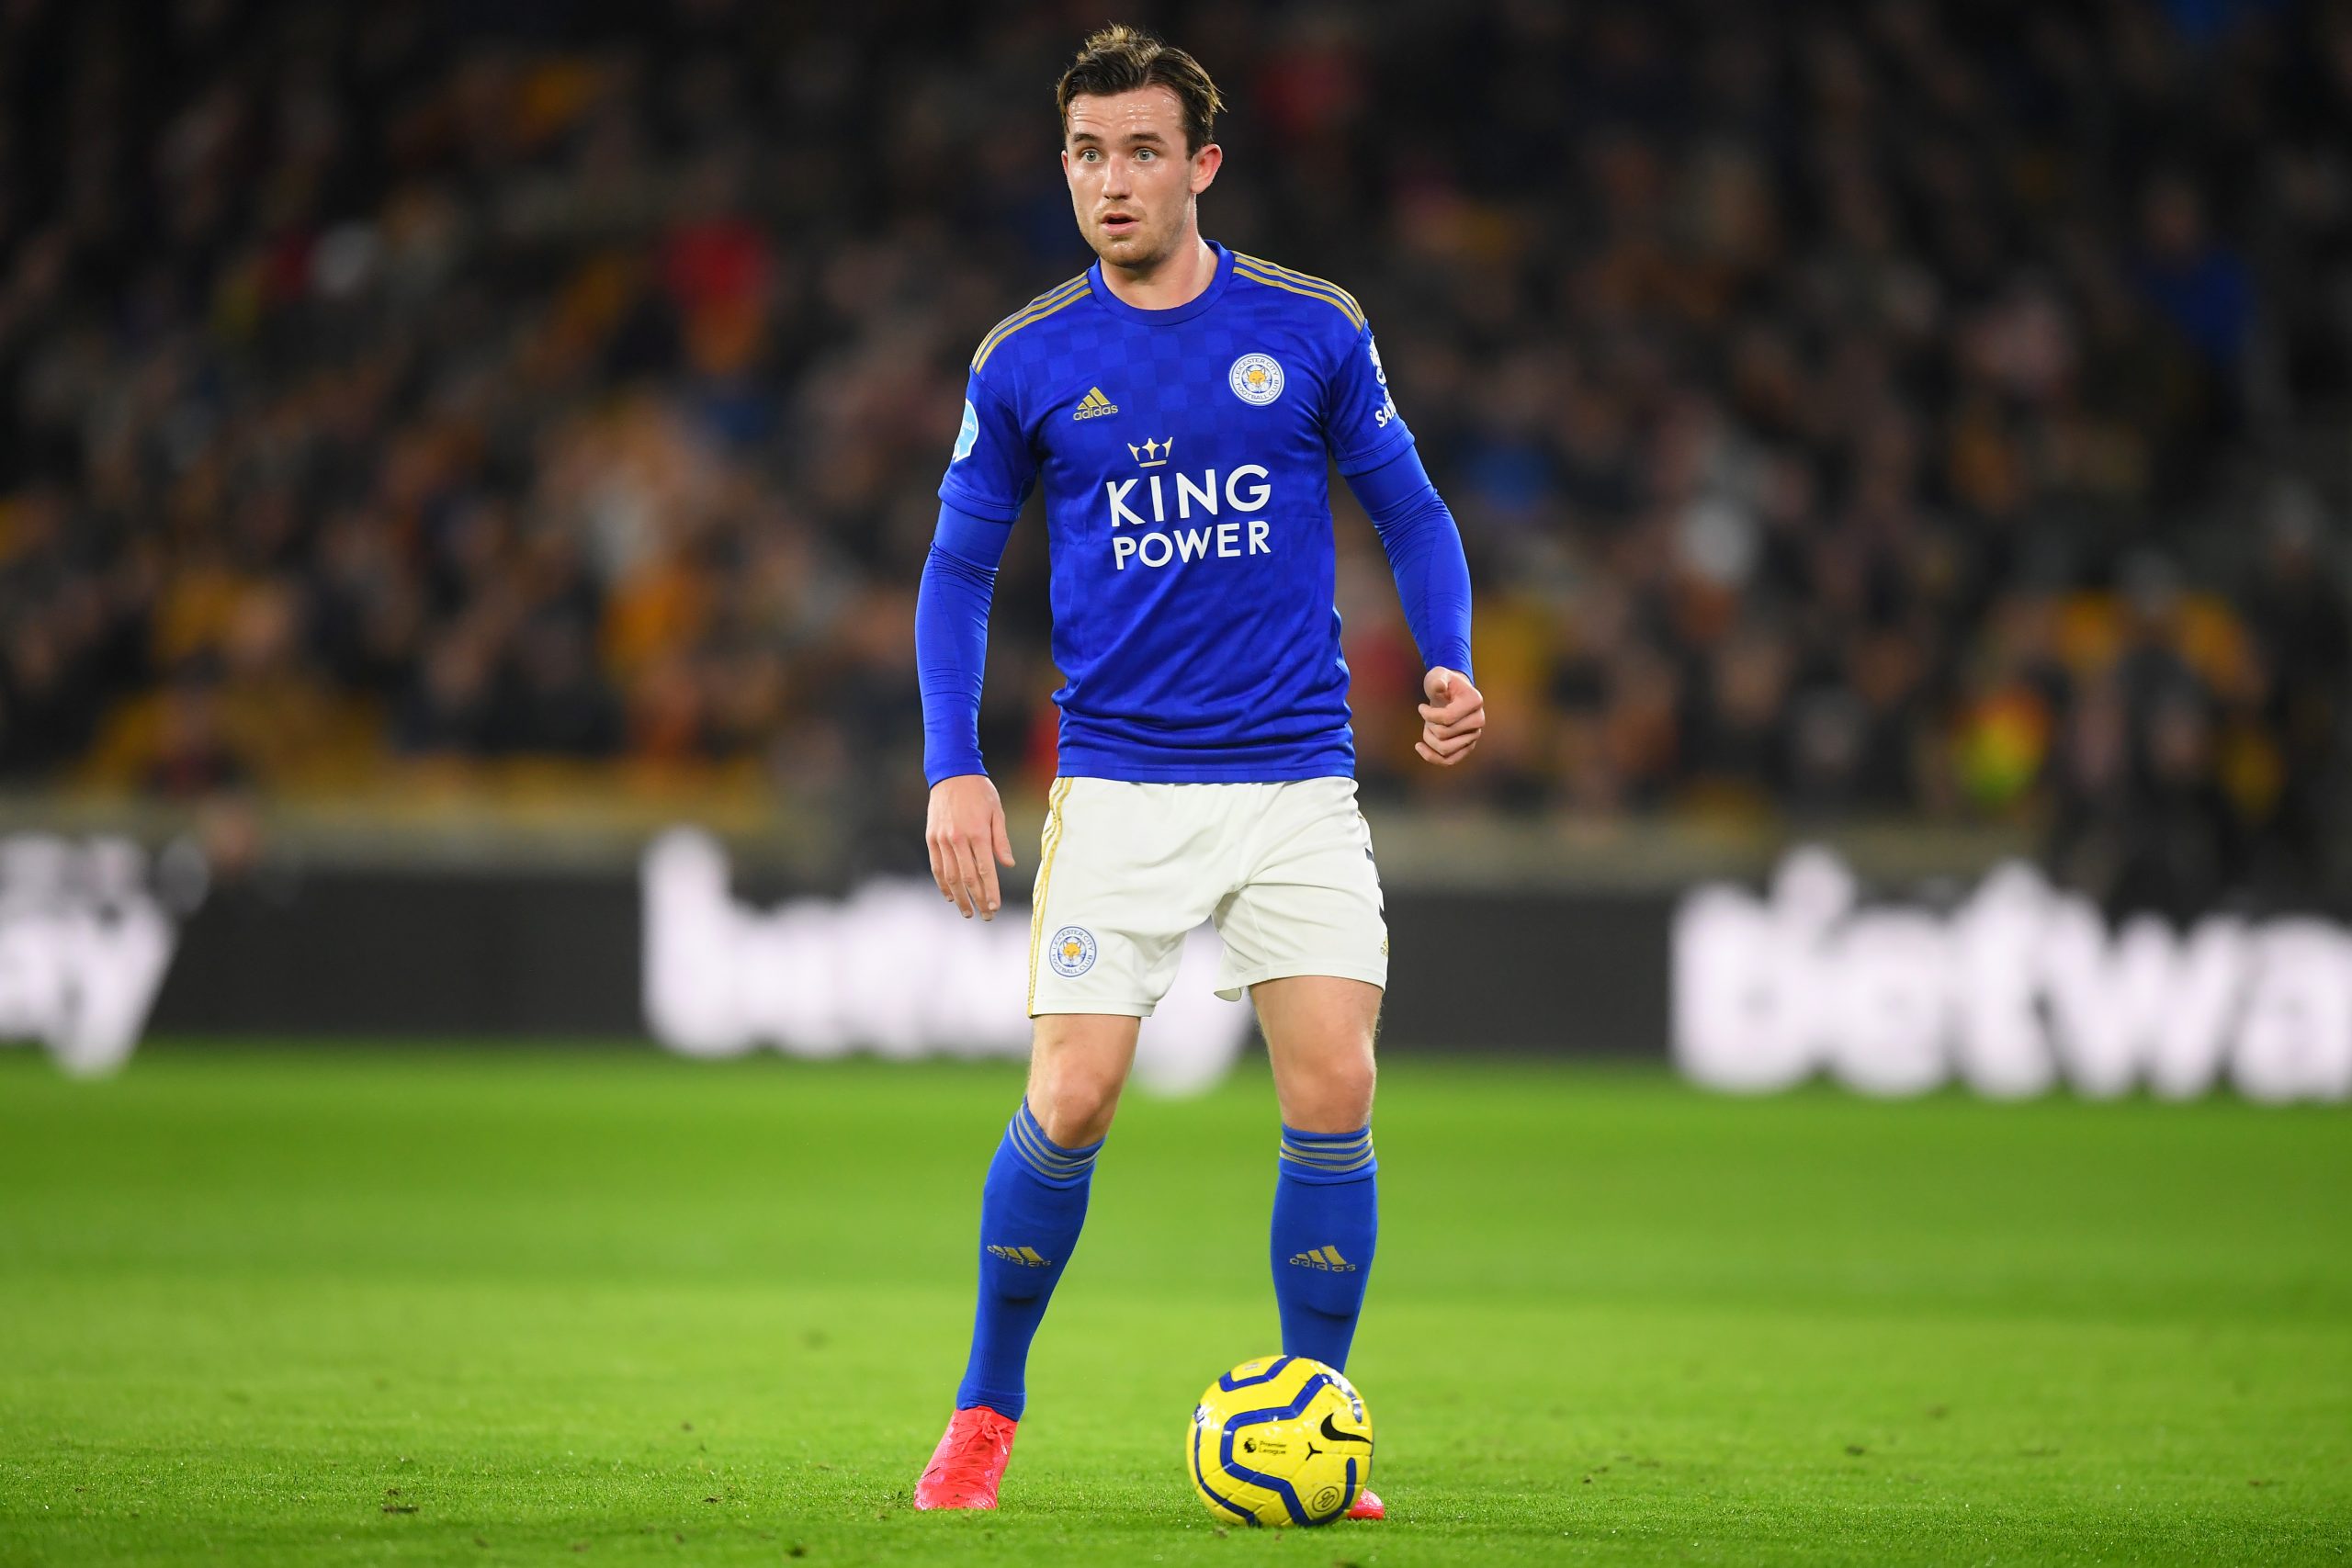 Chelsea hold advantage over Manchester City in pursuit of Chilwell who is seen in the photo